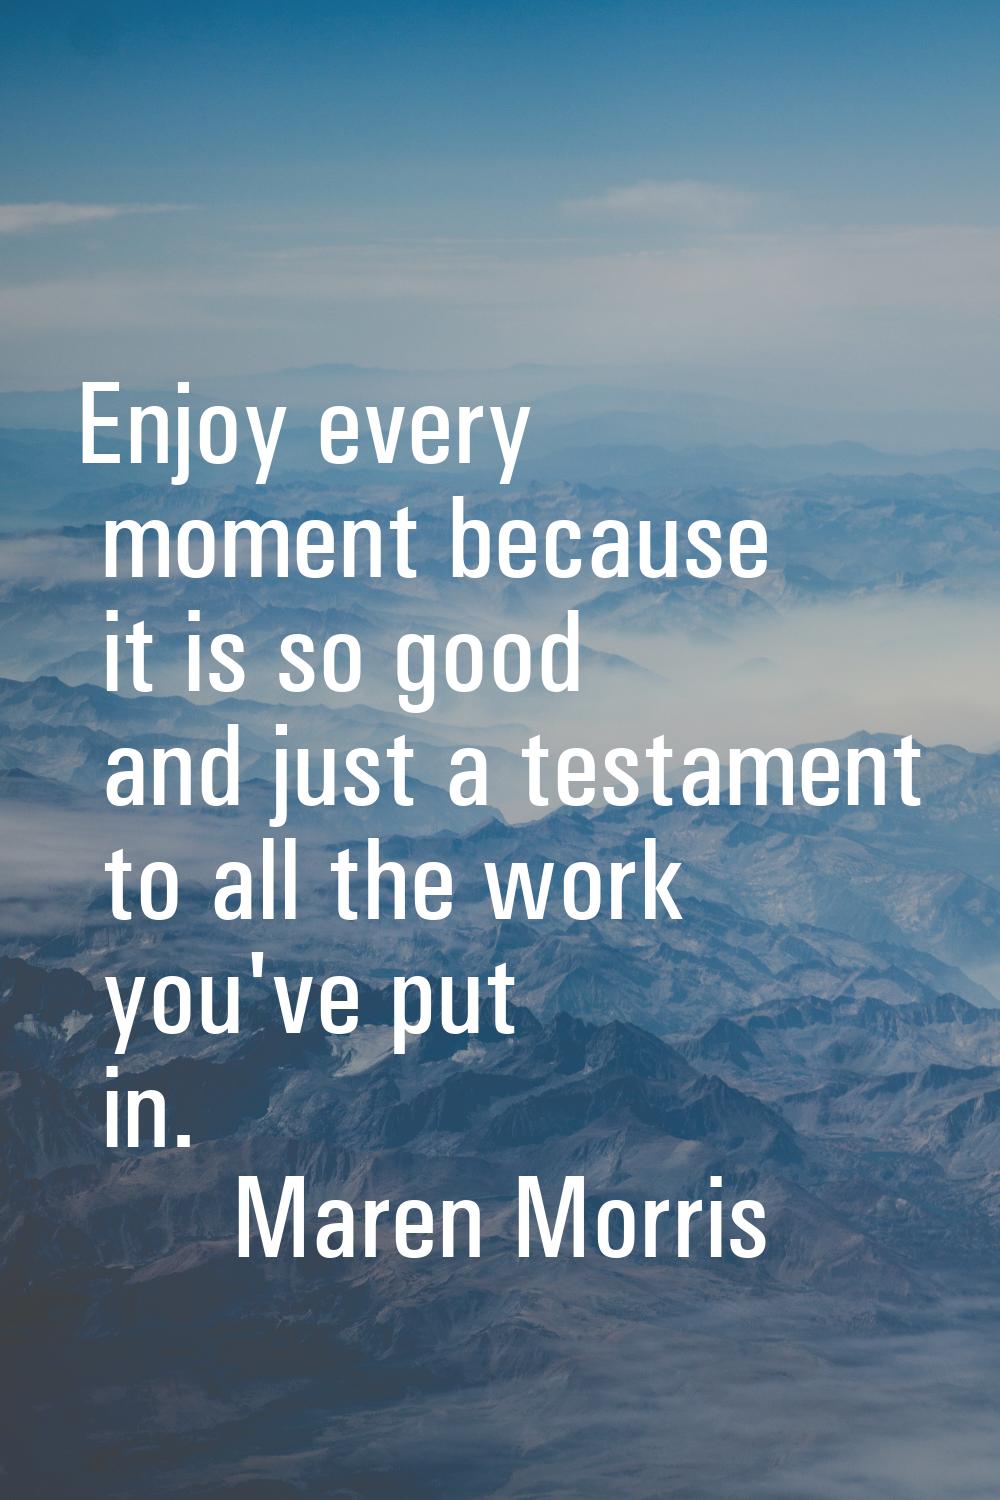 Enjoy every moment because it is so good and just a testament to all the work you've put in.